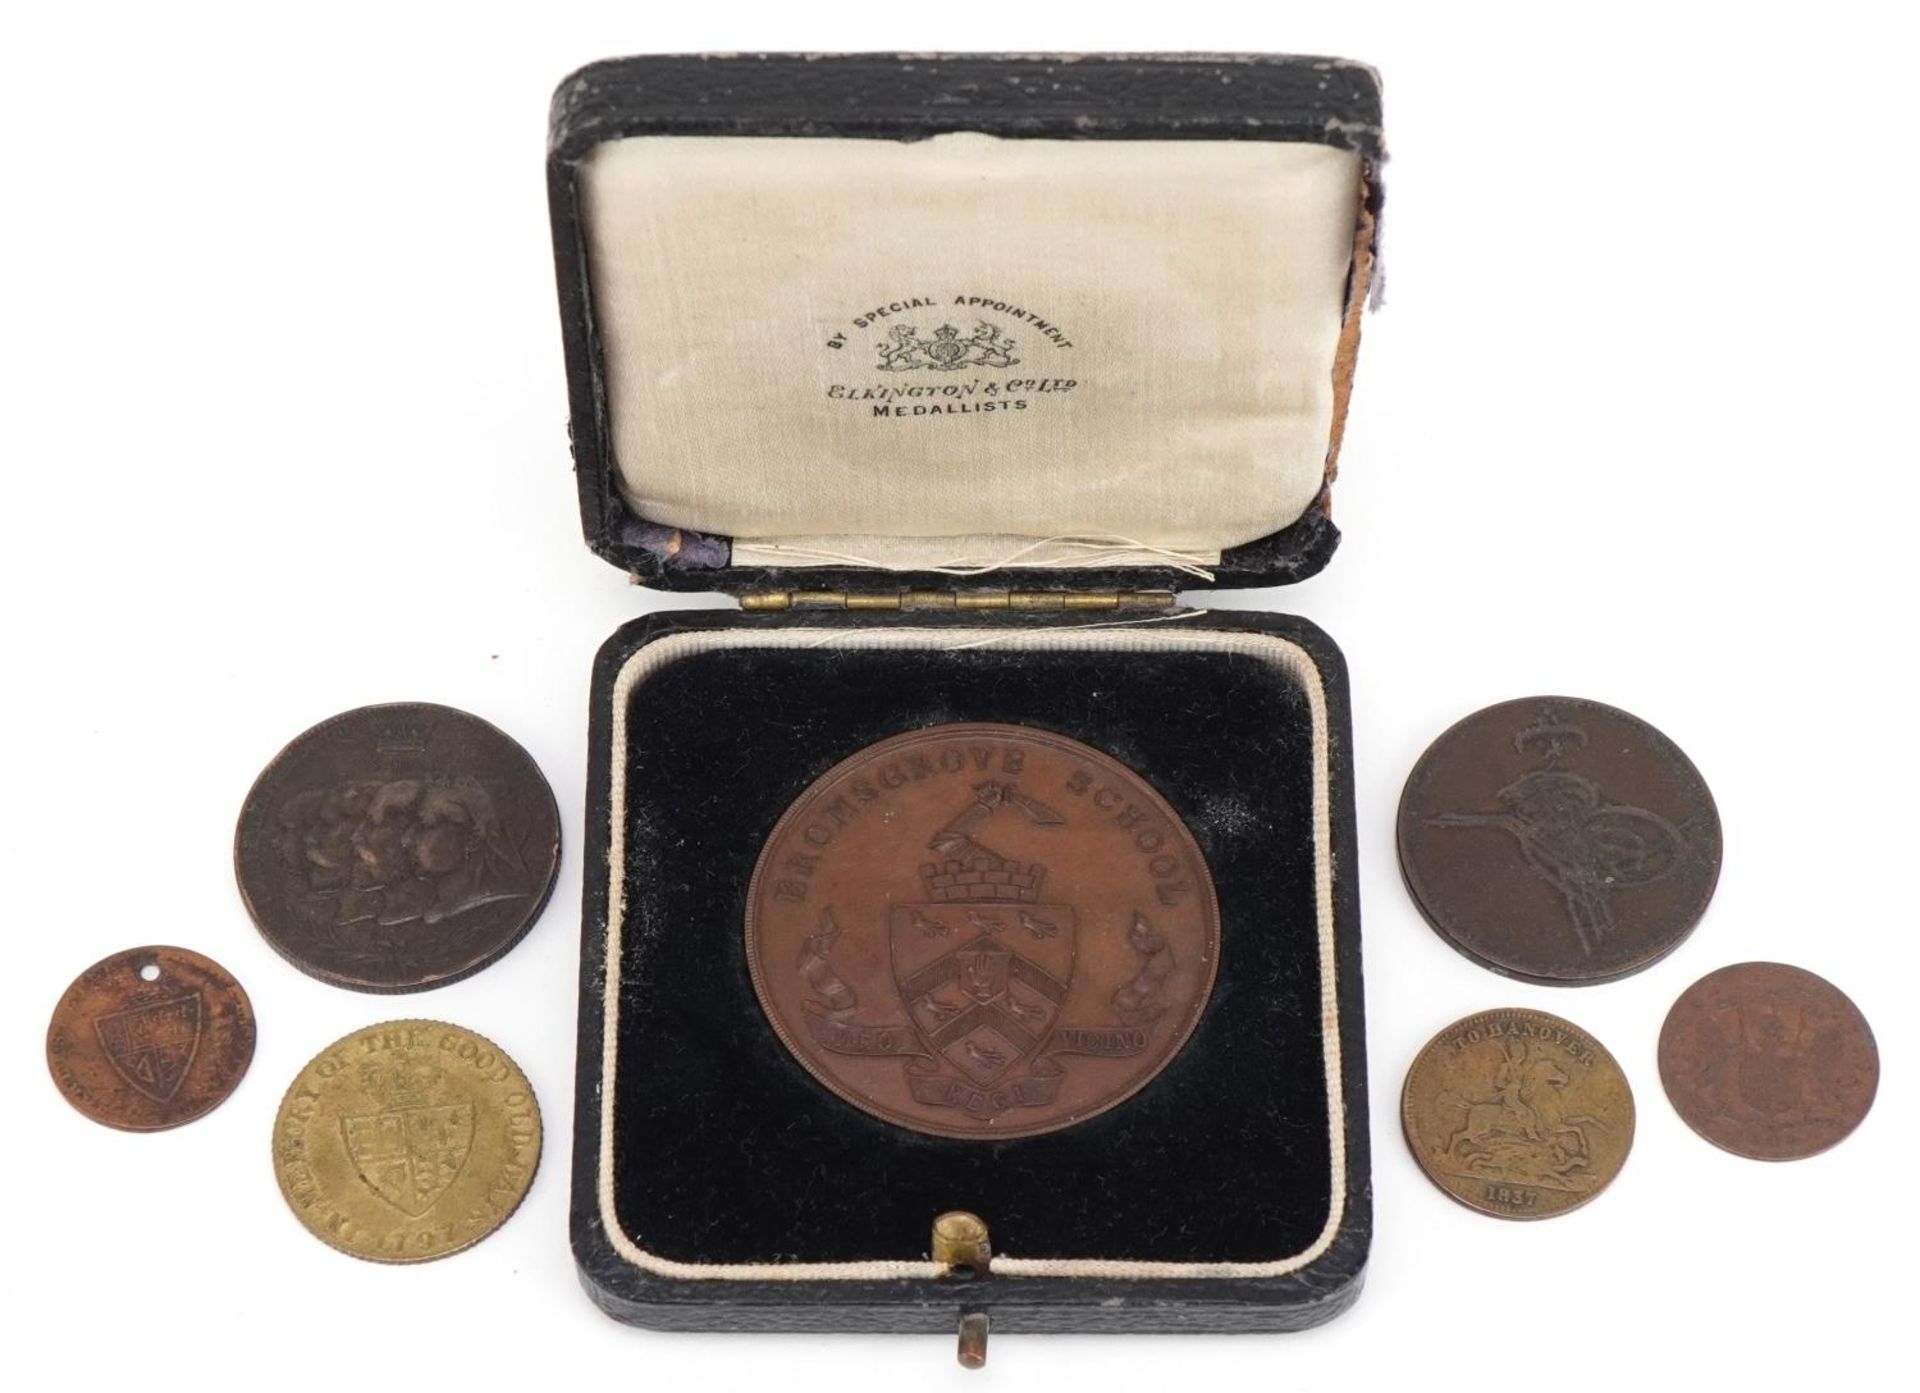 Antique and later coins and medallions including an example commemorating Four Generations of the